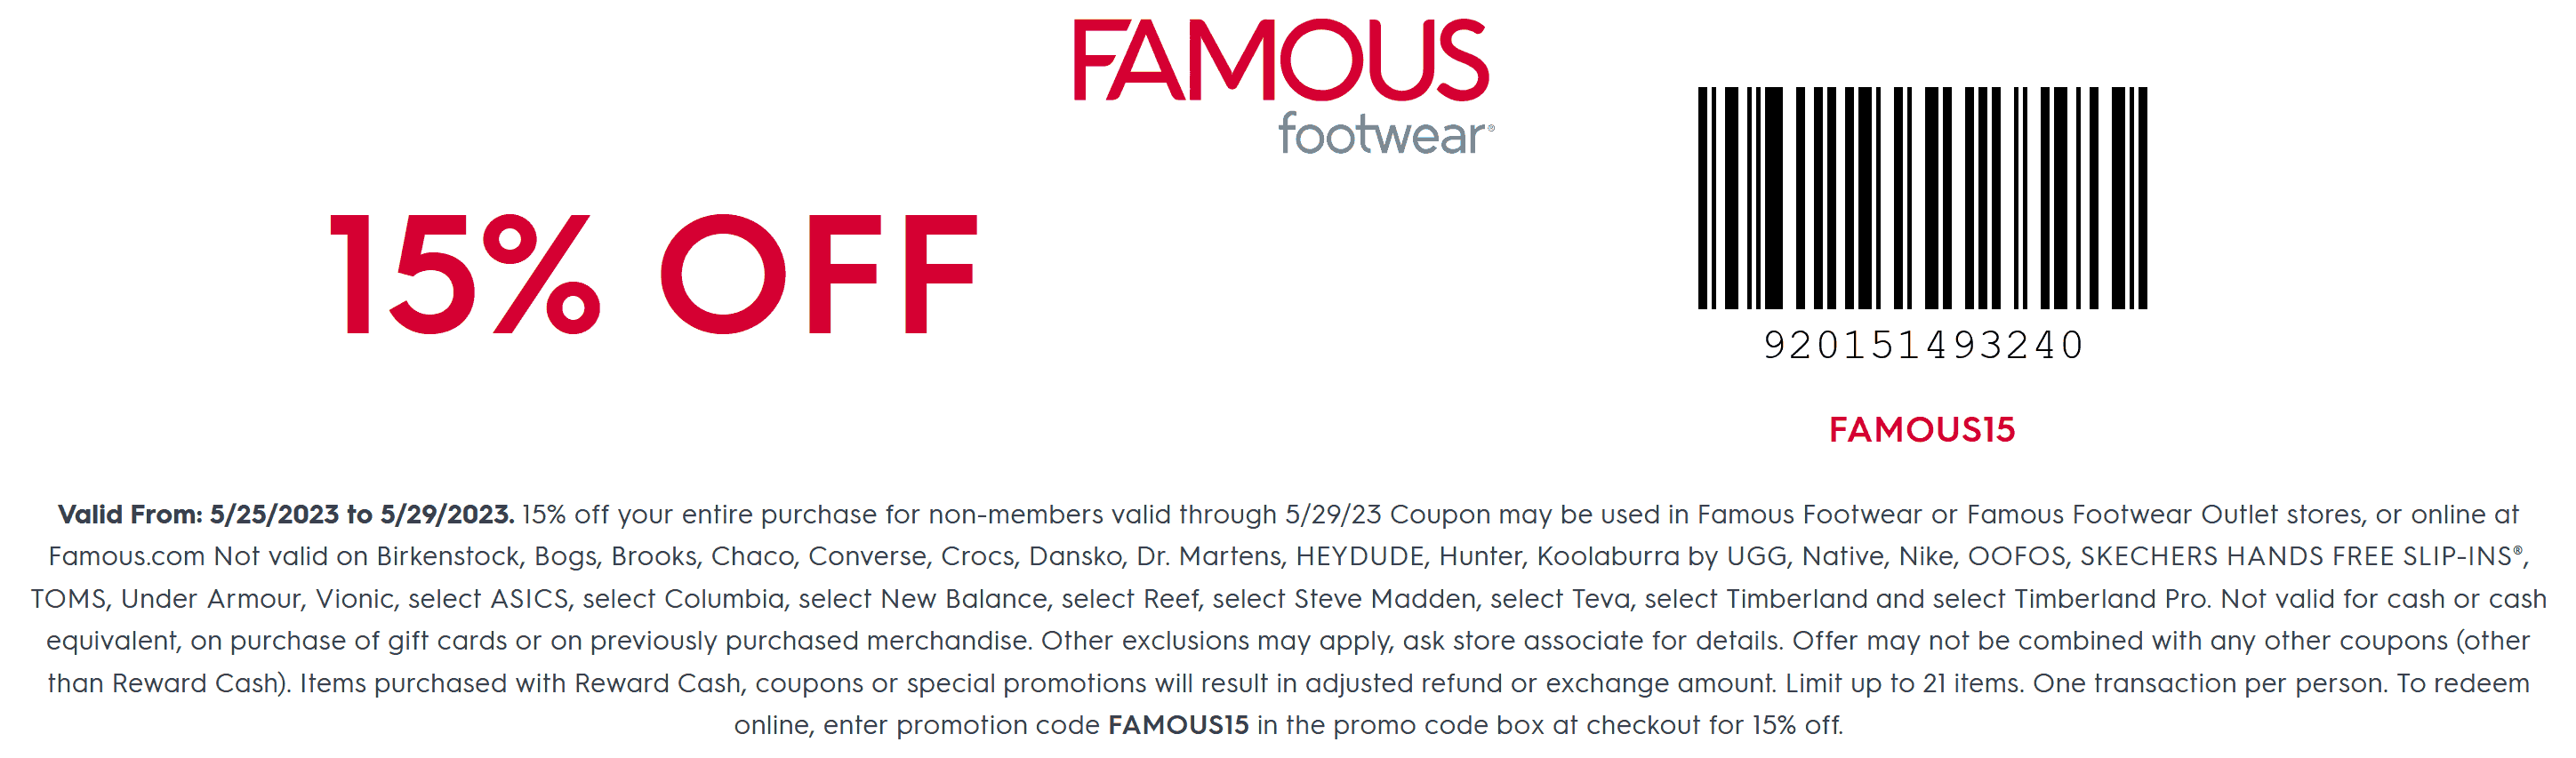 Famous Footwear stores Coupon  15% off today at Famous Footwear, or online via promo code FAMOUS15 #famousfootwear 